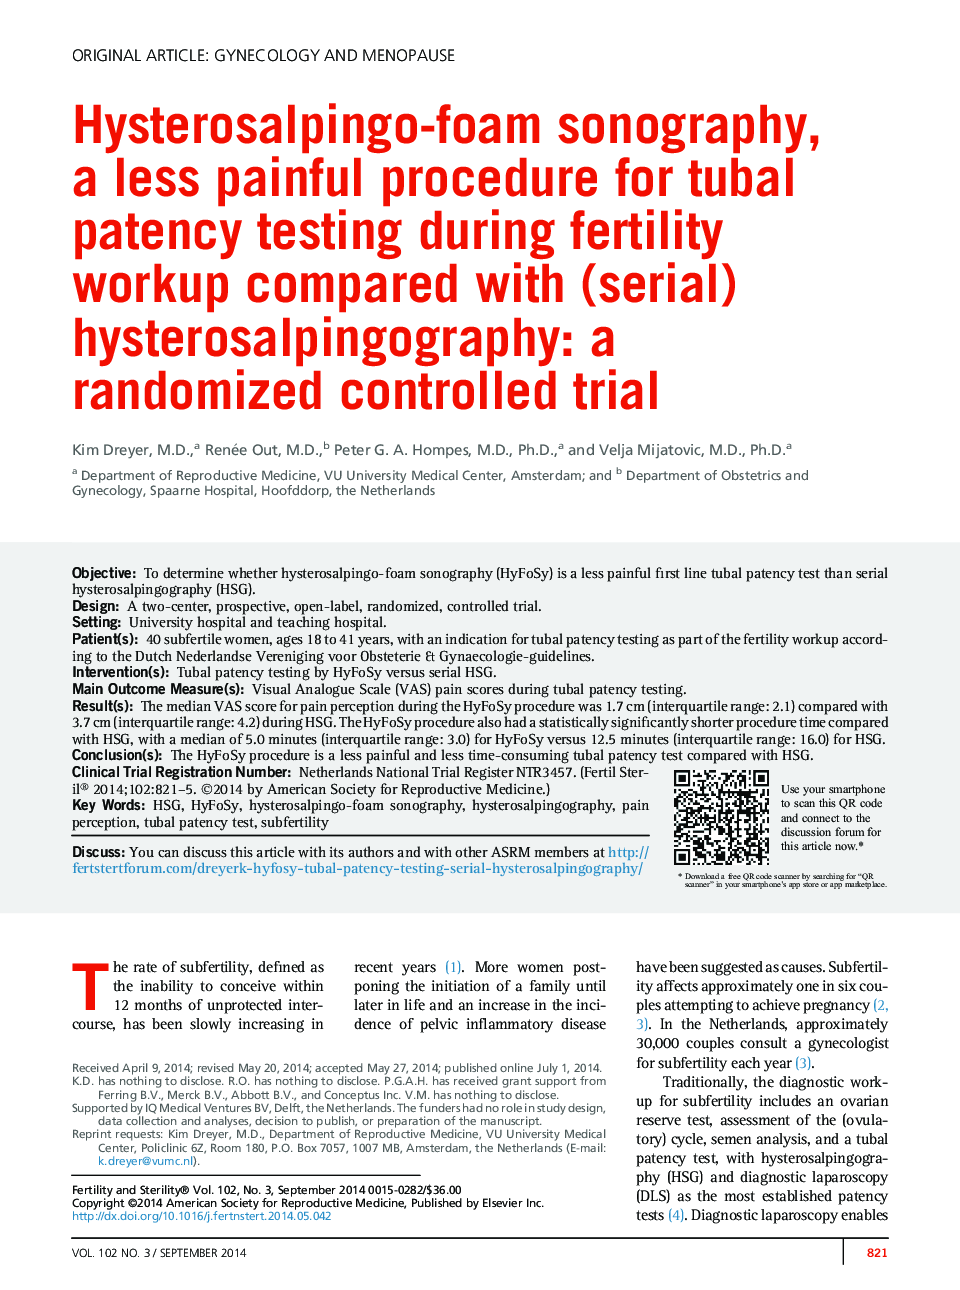 Hysterosalpingo-foam sonography, aÂ less painful procedure for tubal patency testing during fertility workup compared with (serial) hysterosalpingography: a randomized controlled trial